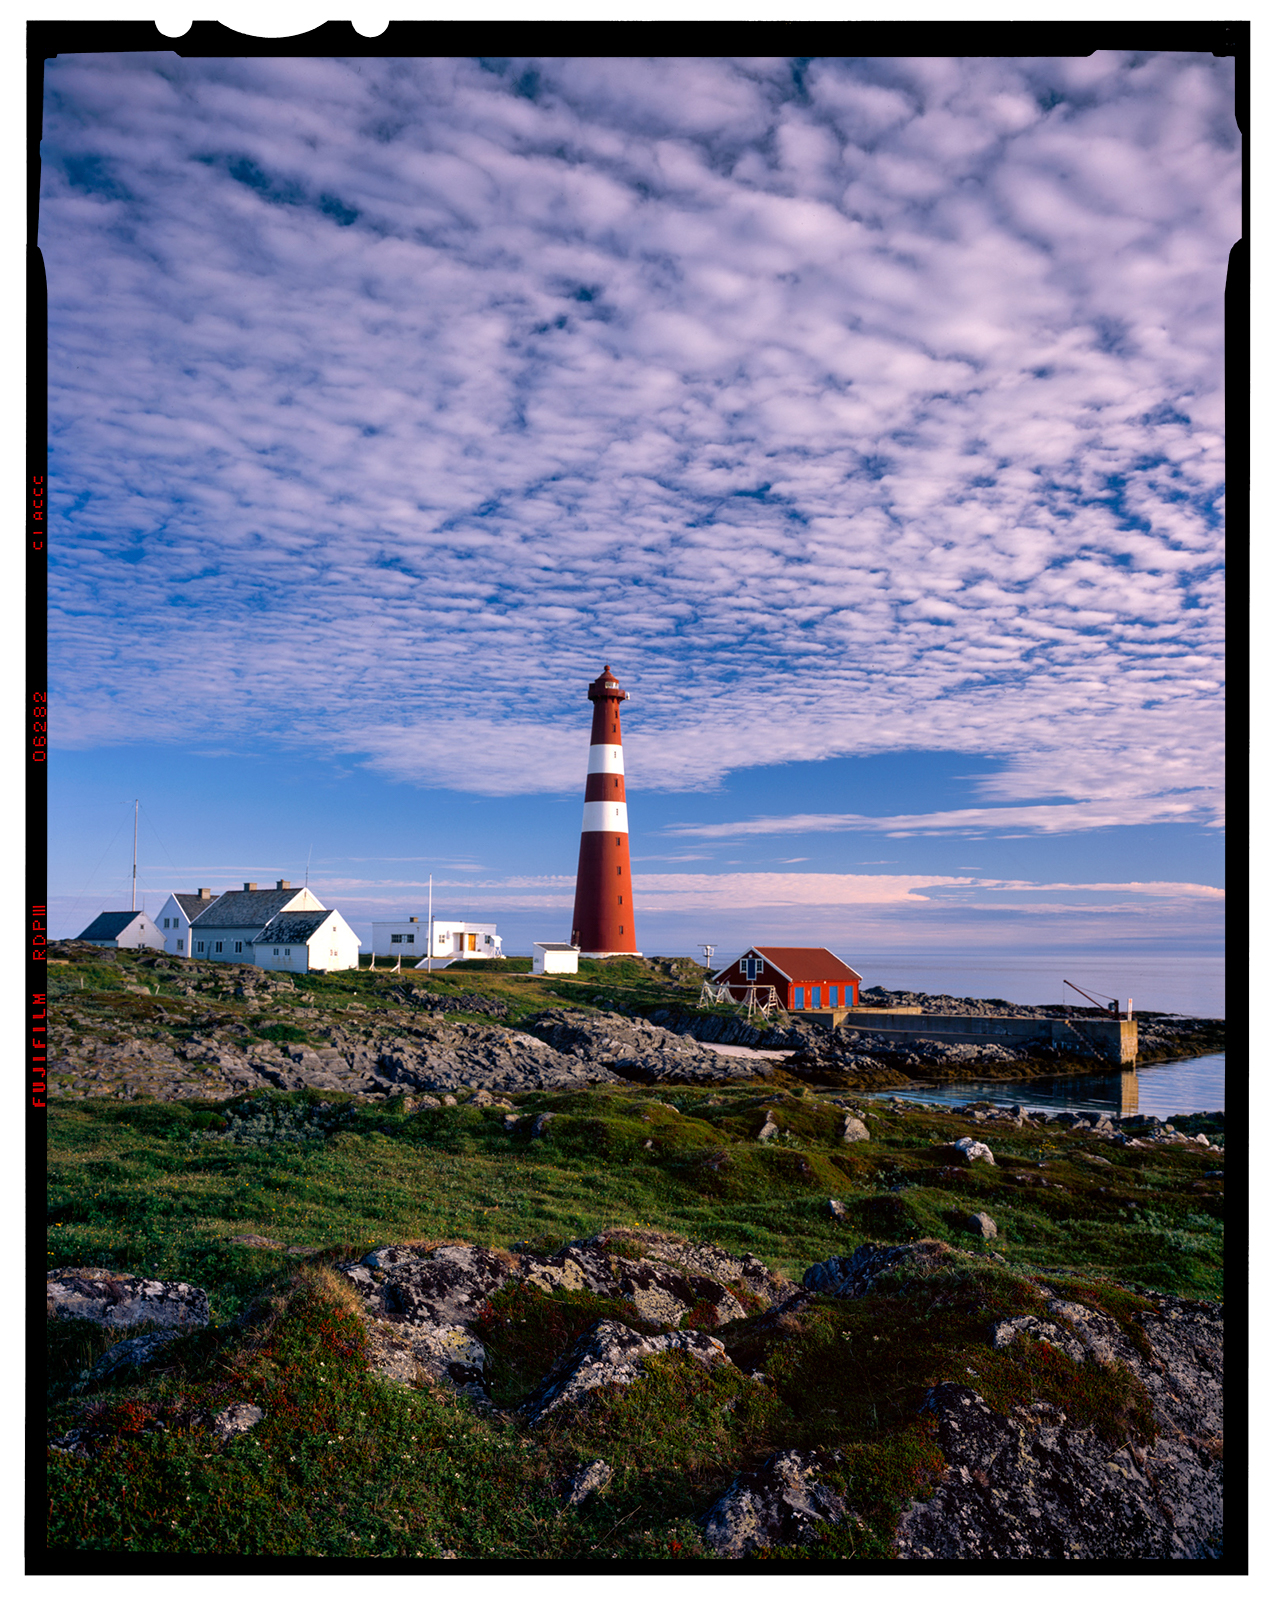 To The northerly lighthouse in Europe...